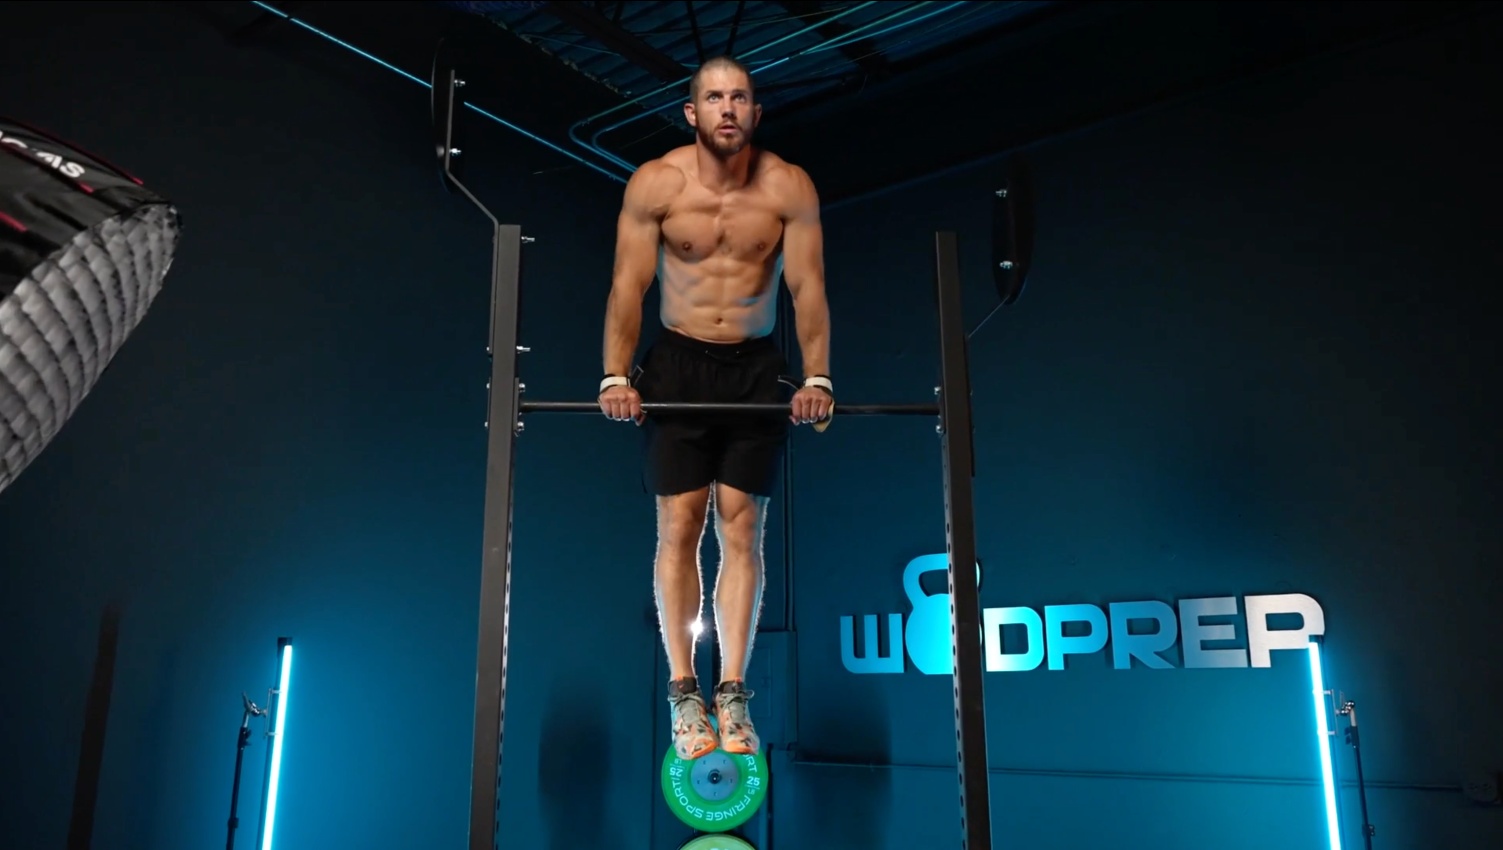 Get Strong and Sexy: CrossFit® Strength Program - WODprep